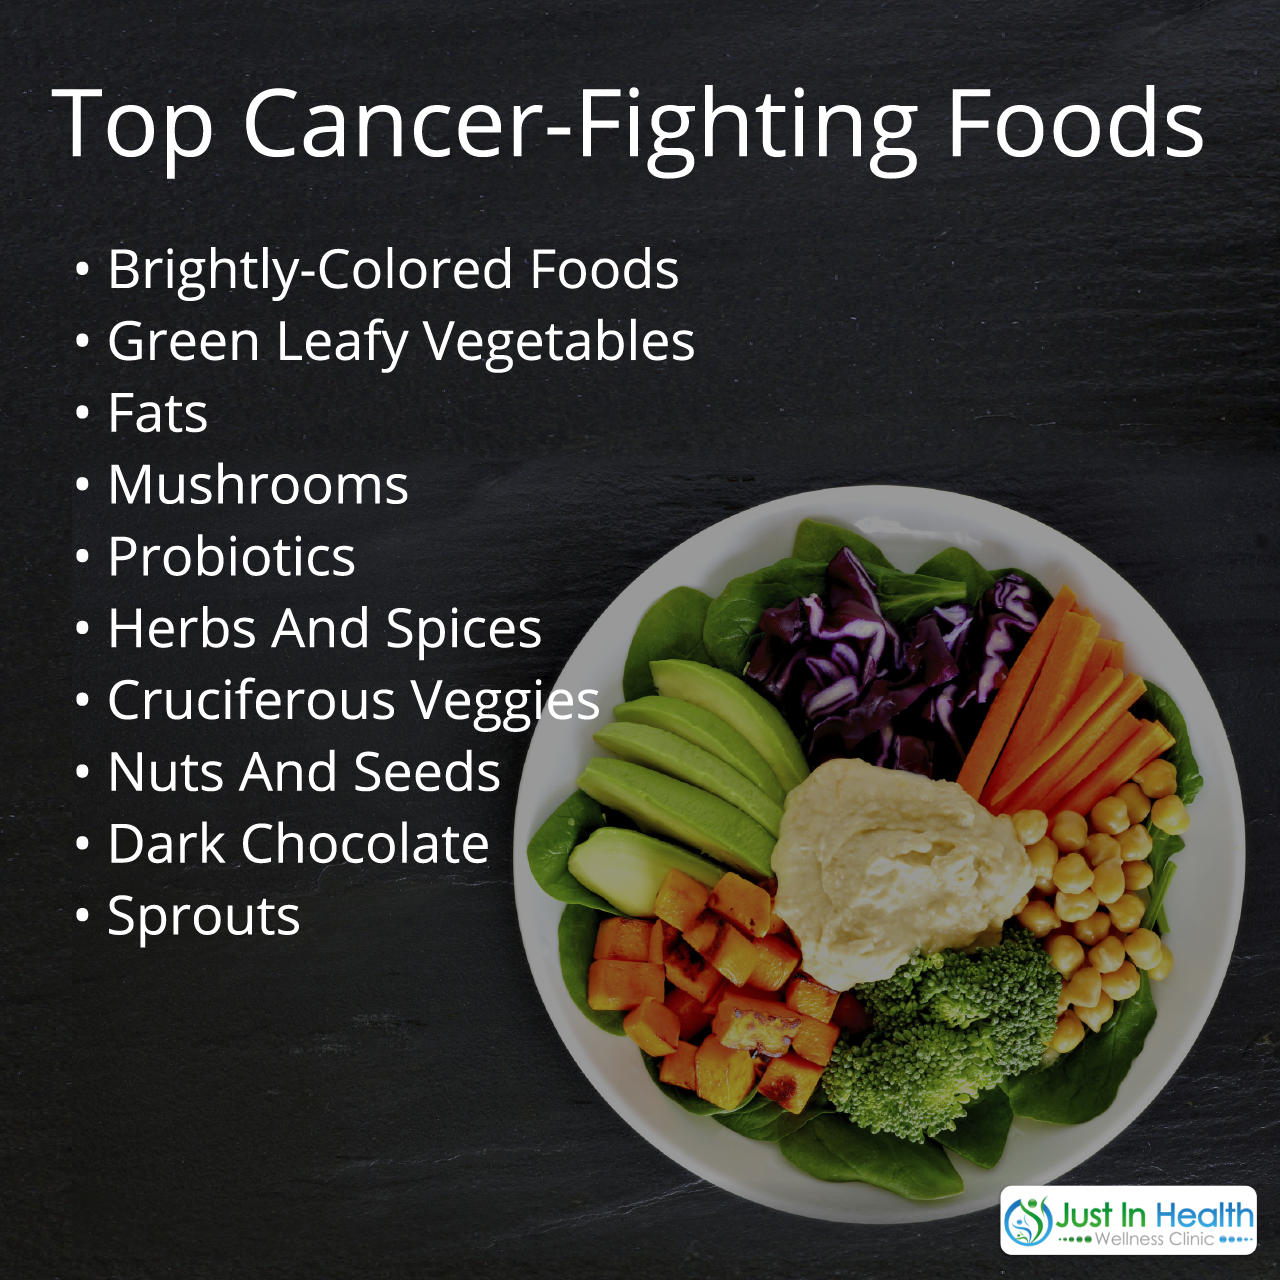 Download Top Cancer-Fighting Foods | Just In Health